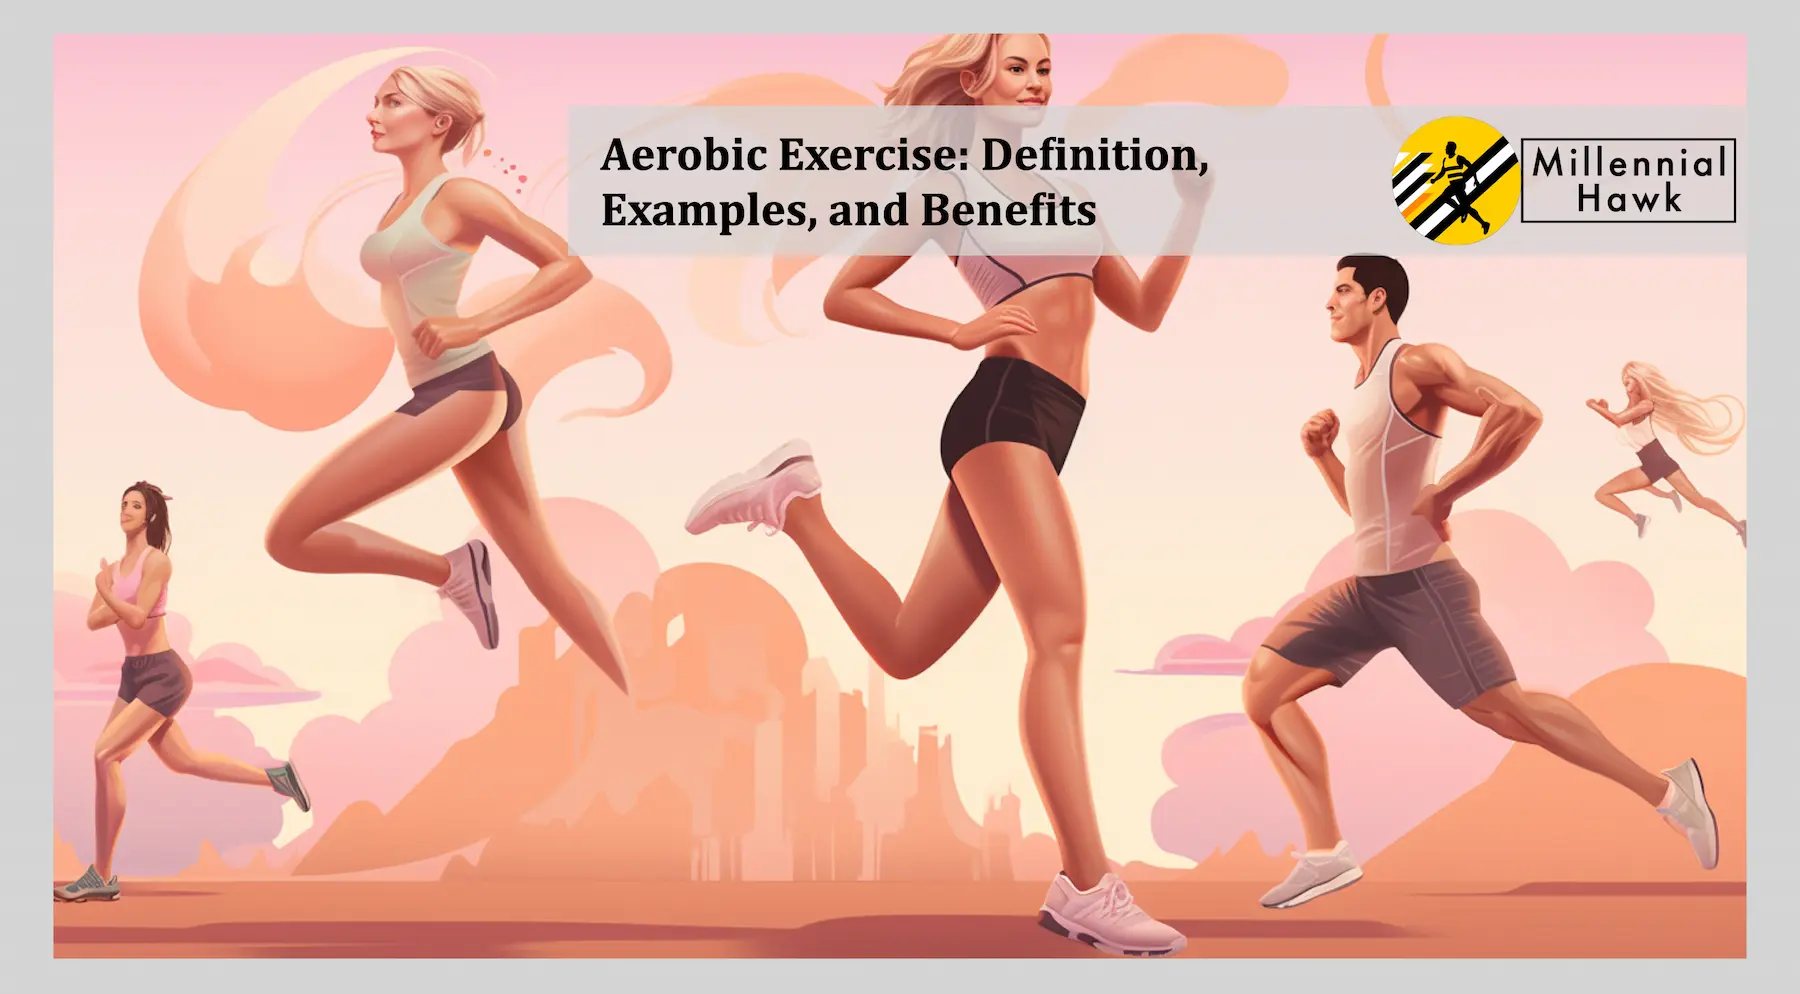 the benefits, examples, and benefits of cardio and aerobic exercise